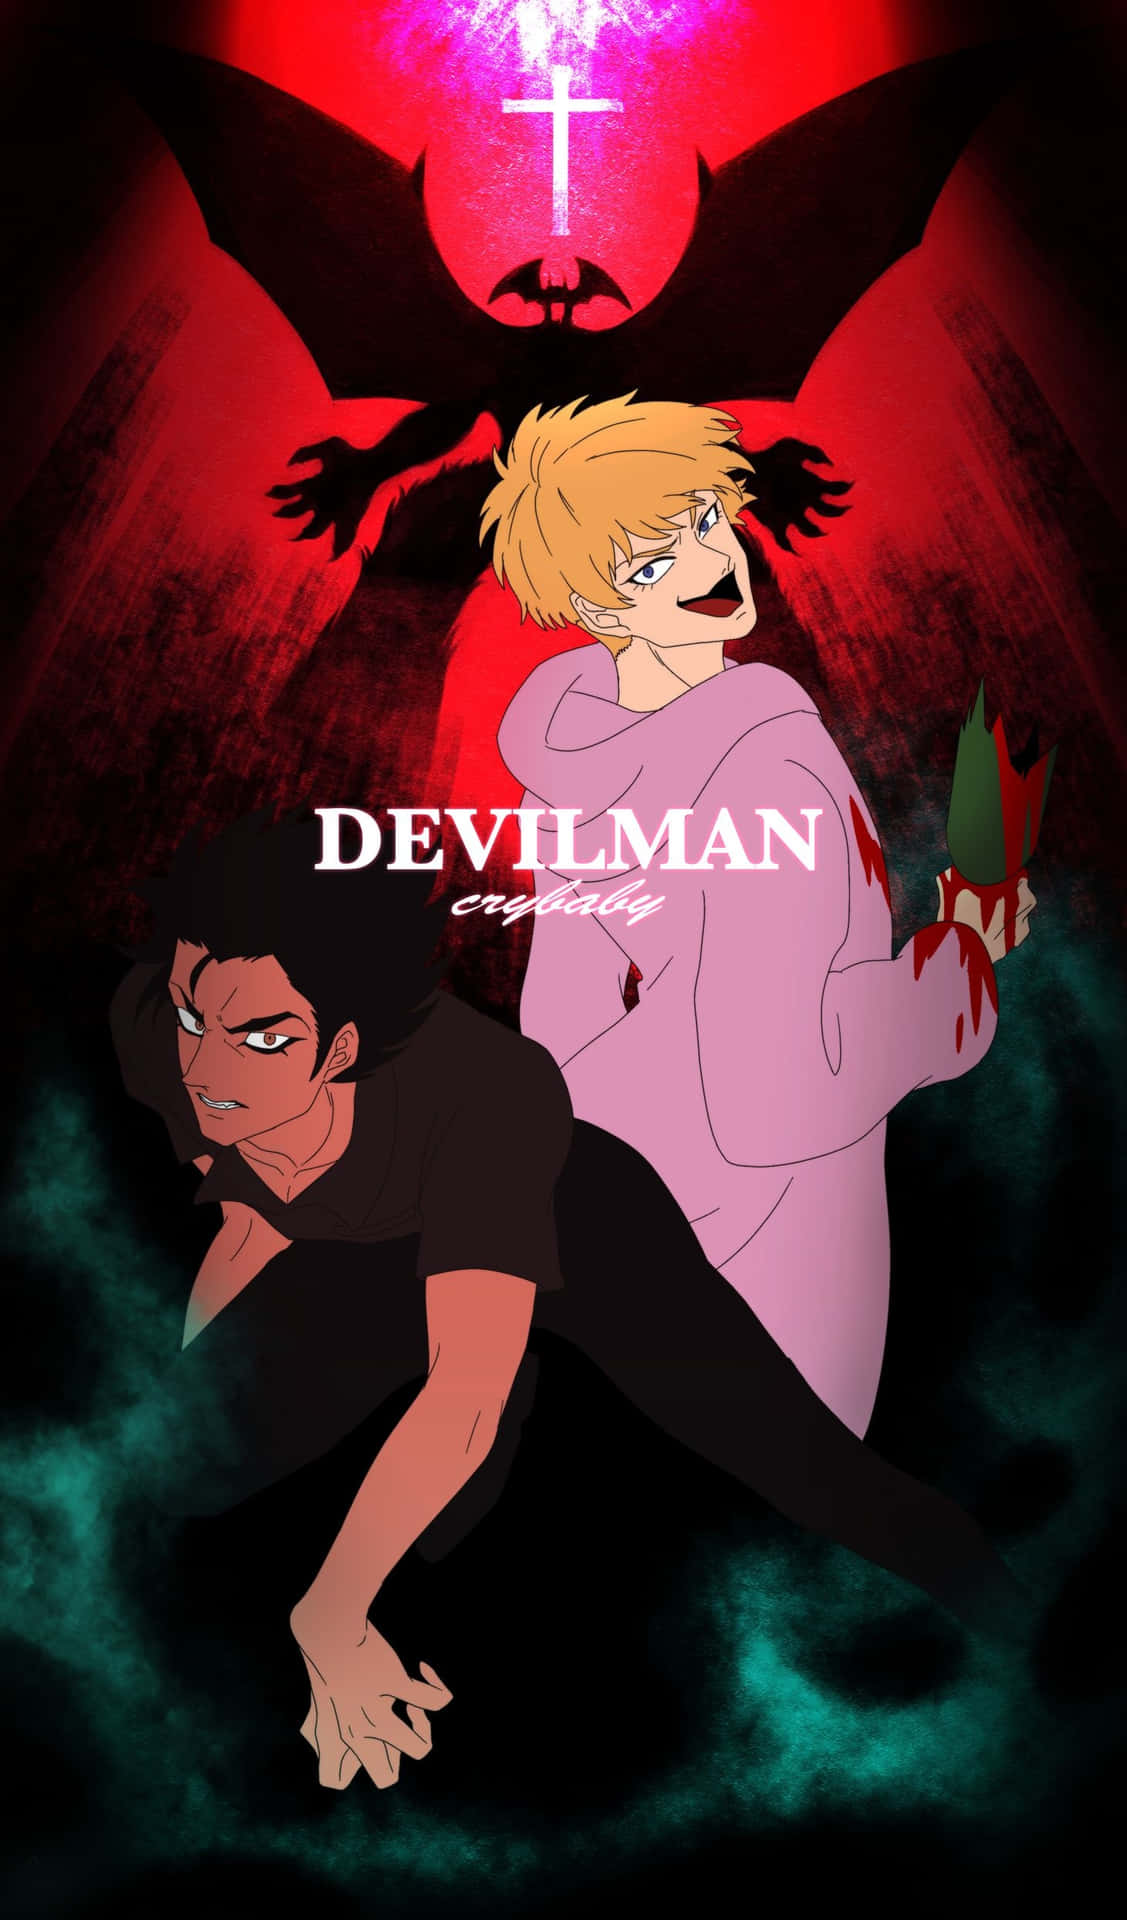 Follow Amon's path and discover the truth of Devilman Crybaby